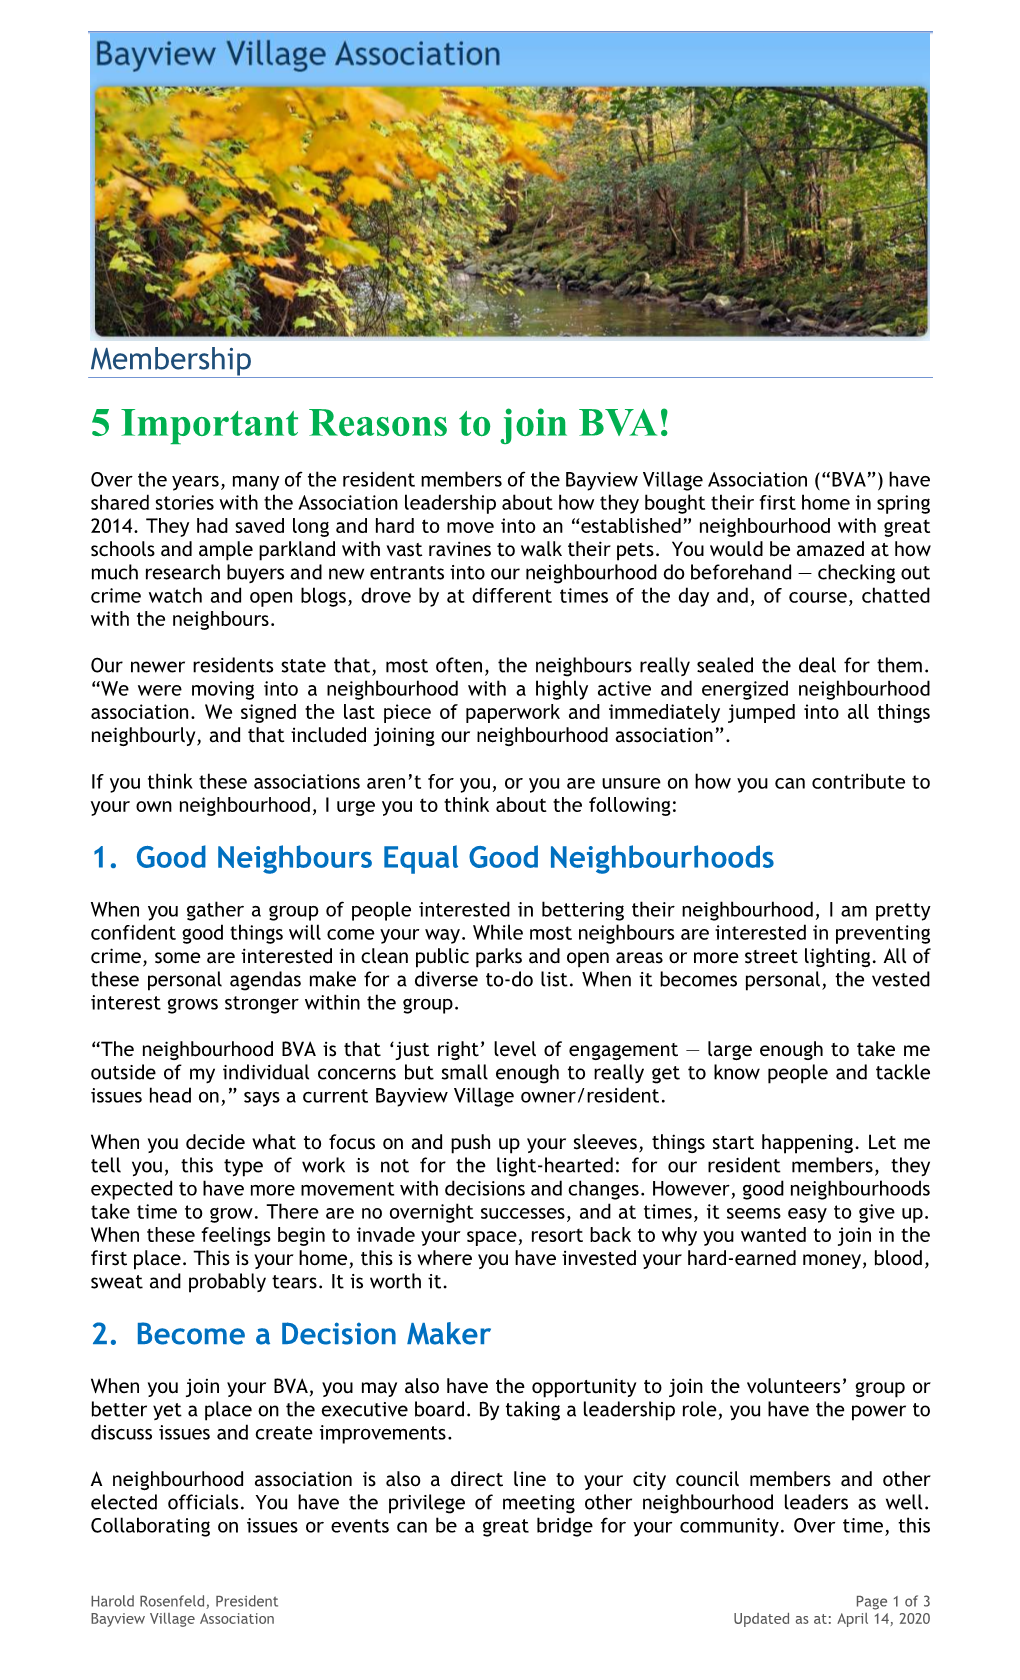 5 Important Reasons to Join BVA!